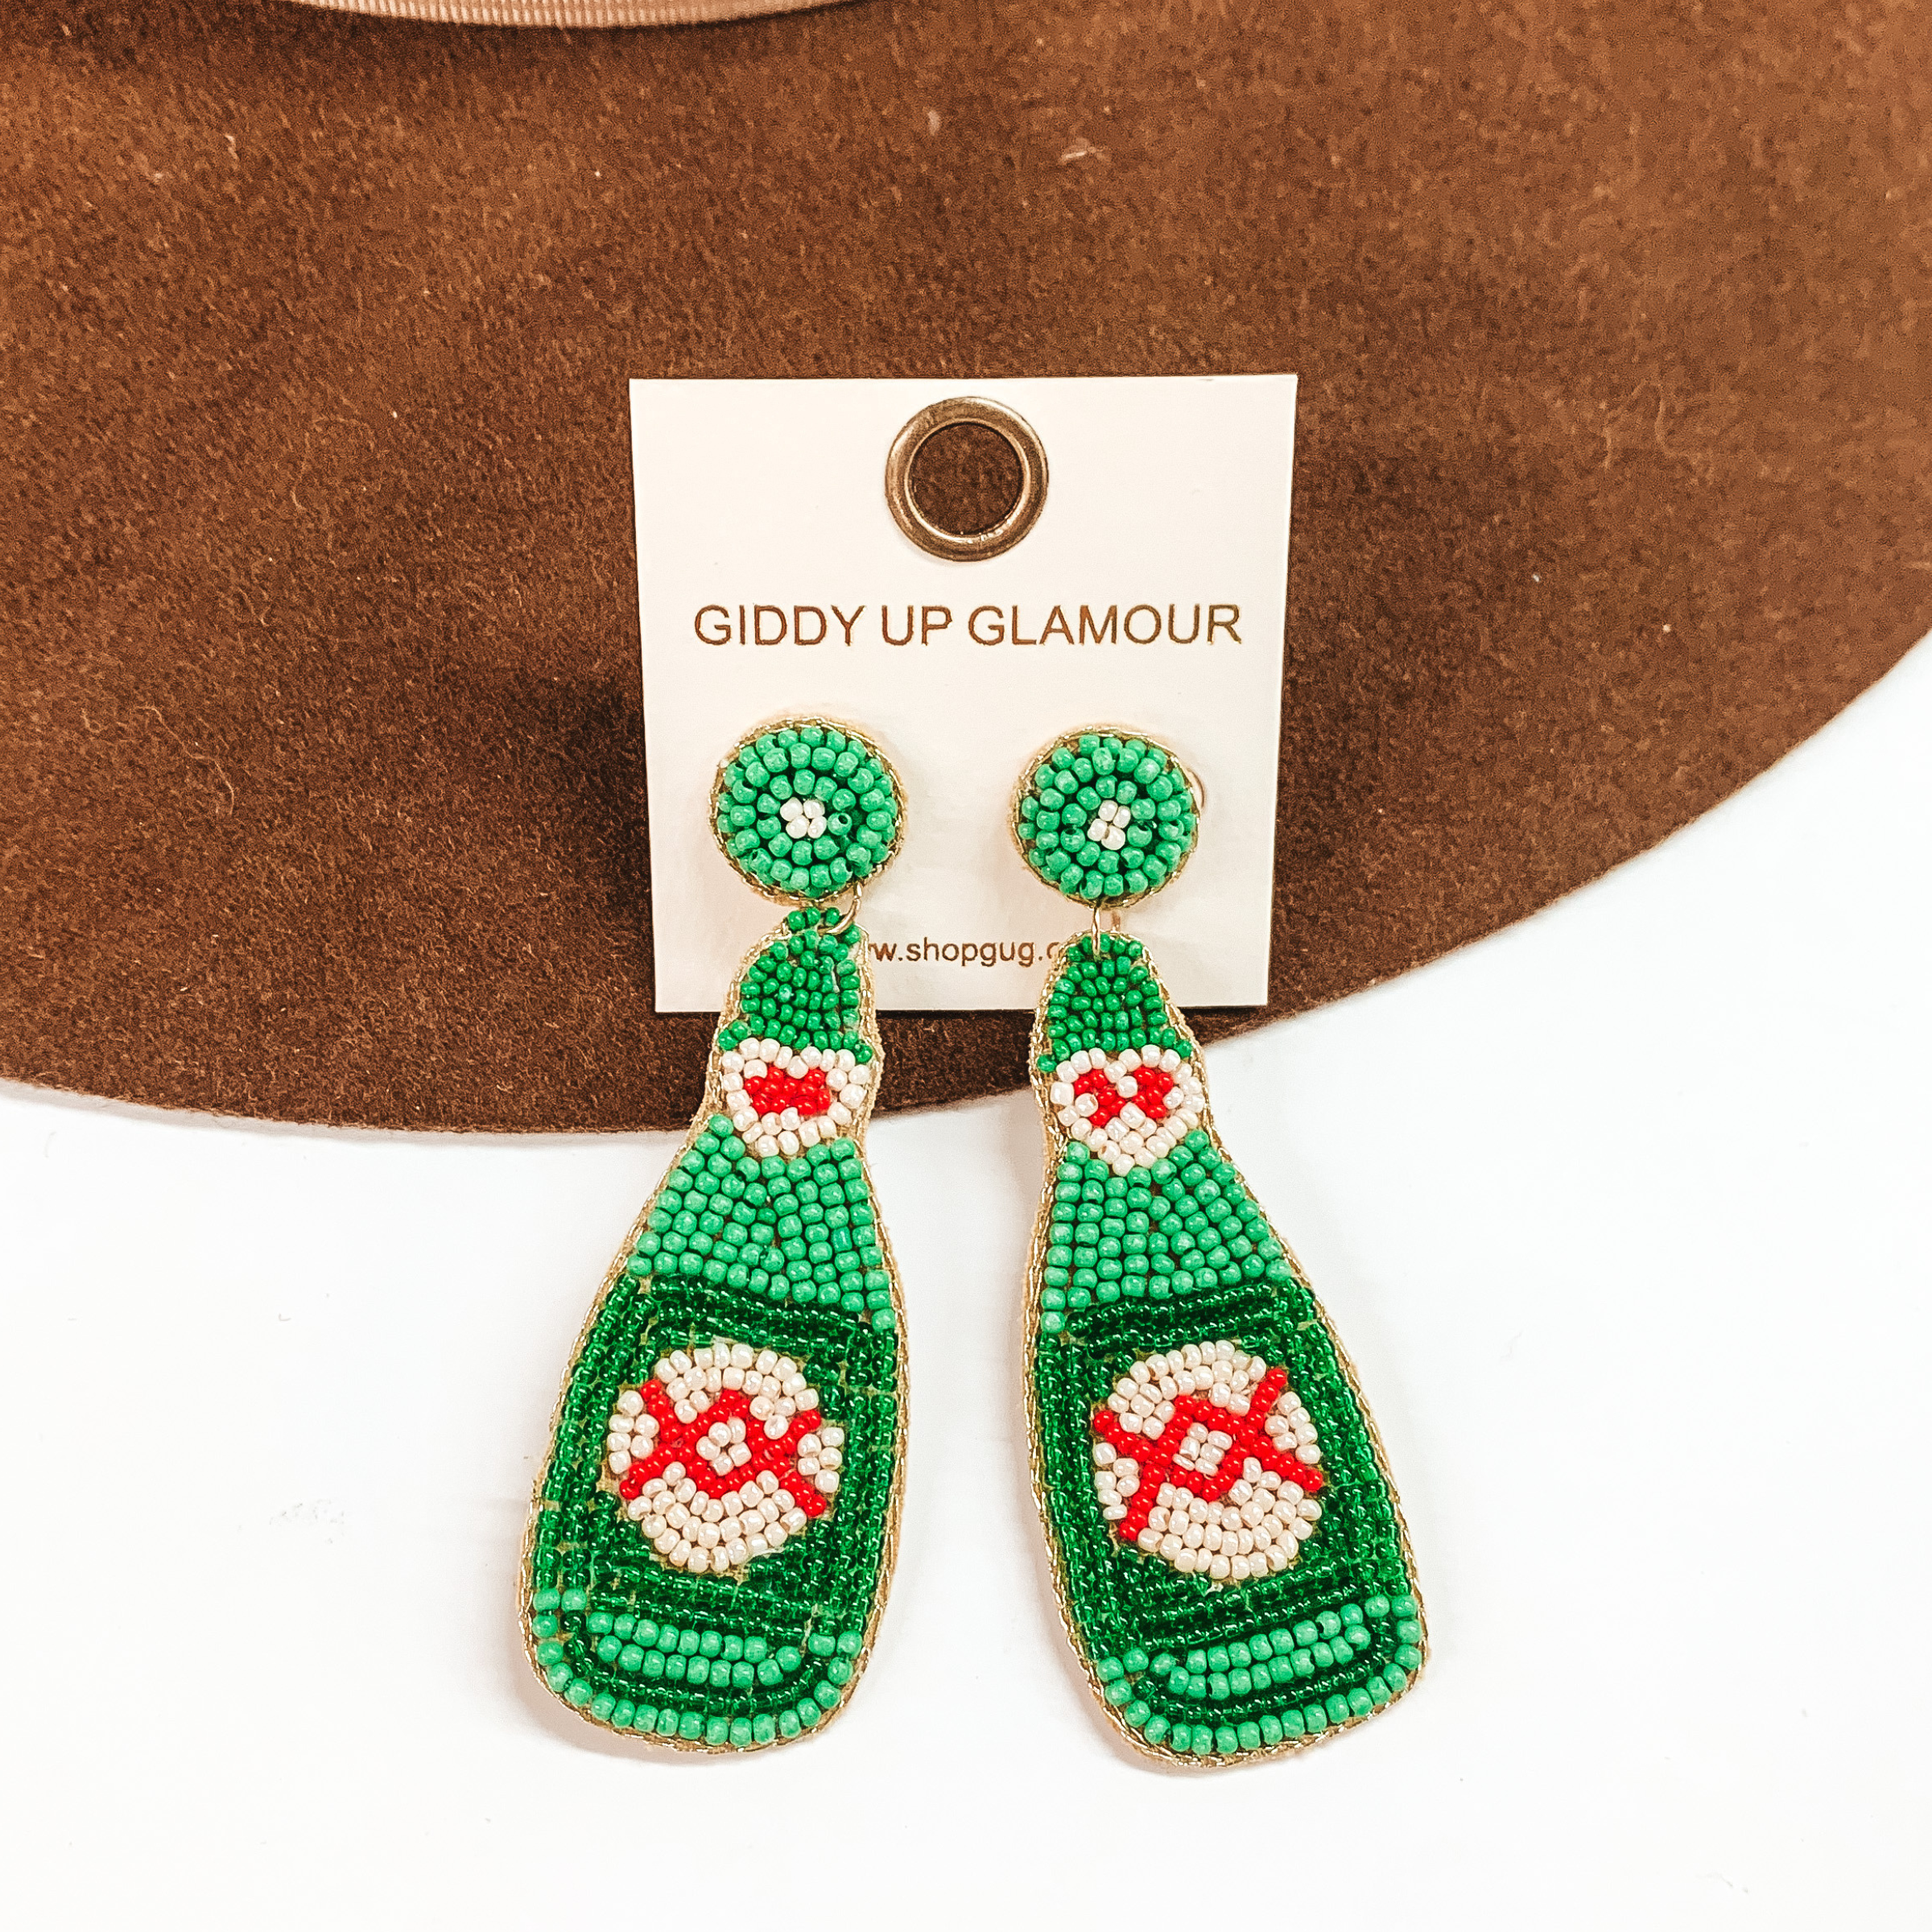 Green beaded bottle earrings with a white and red beaded design. These earrings are pictured on a white and brown background.